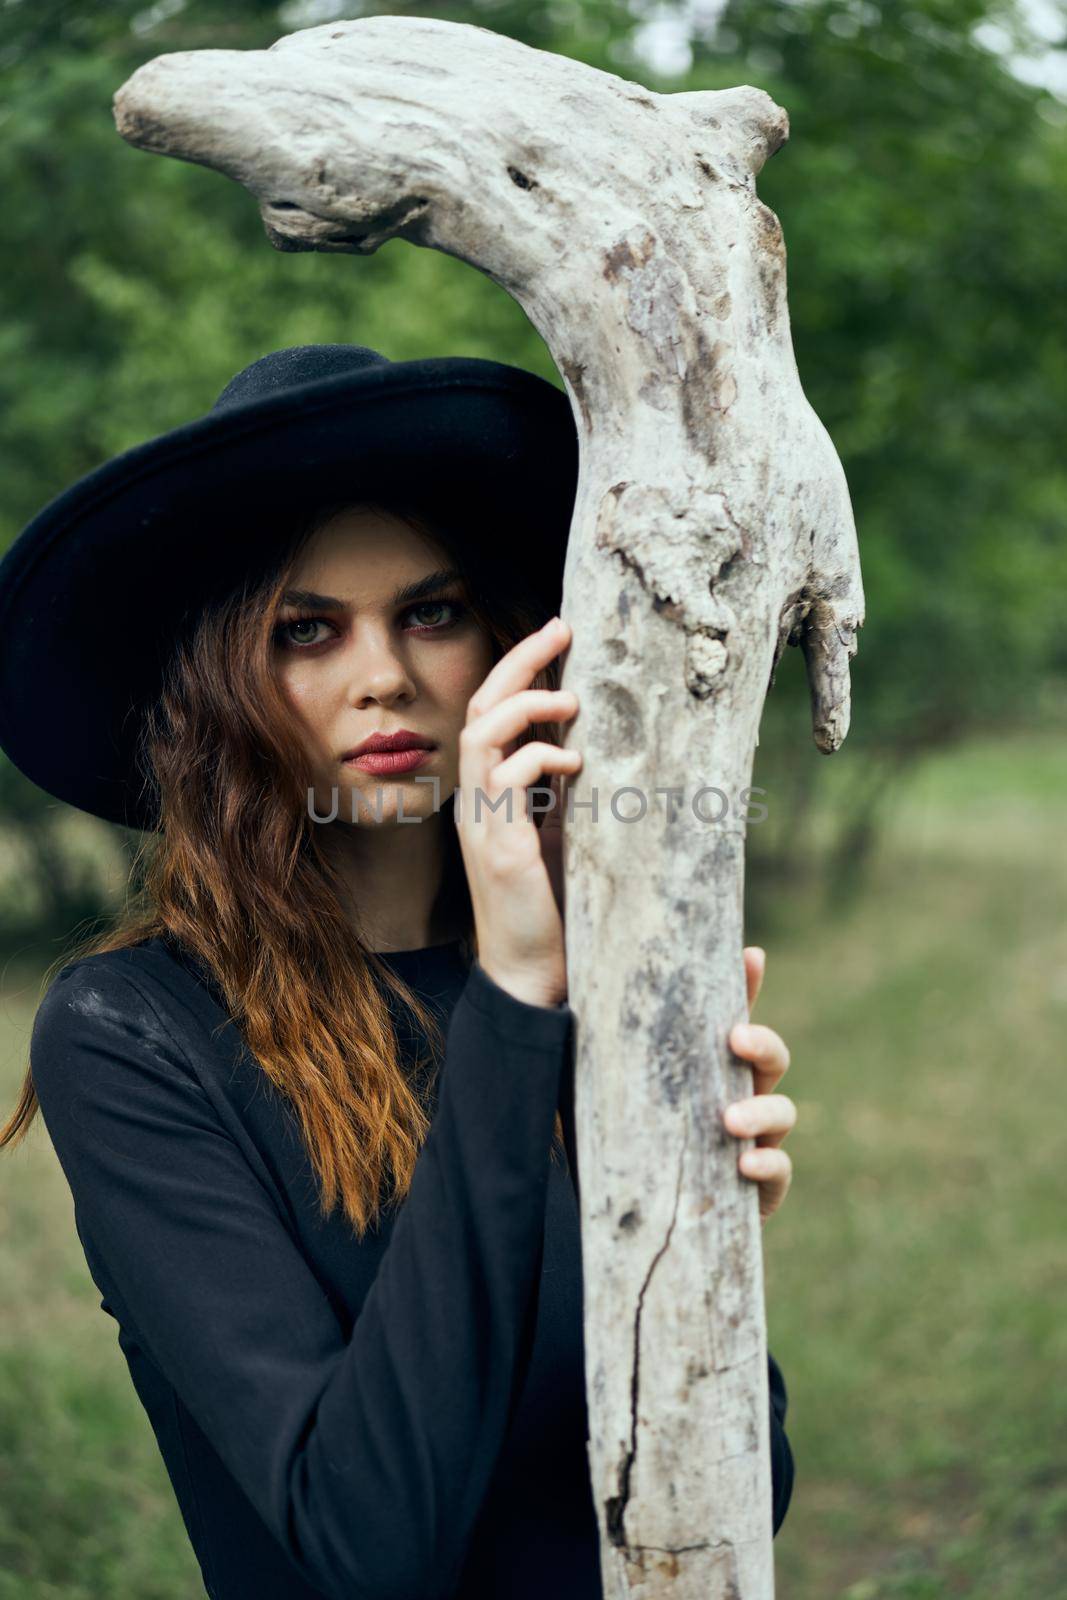 woman in witch costume halloween forest staff gothic. High quality photo